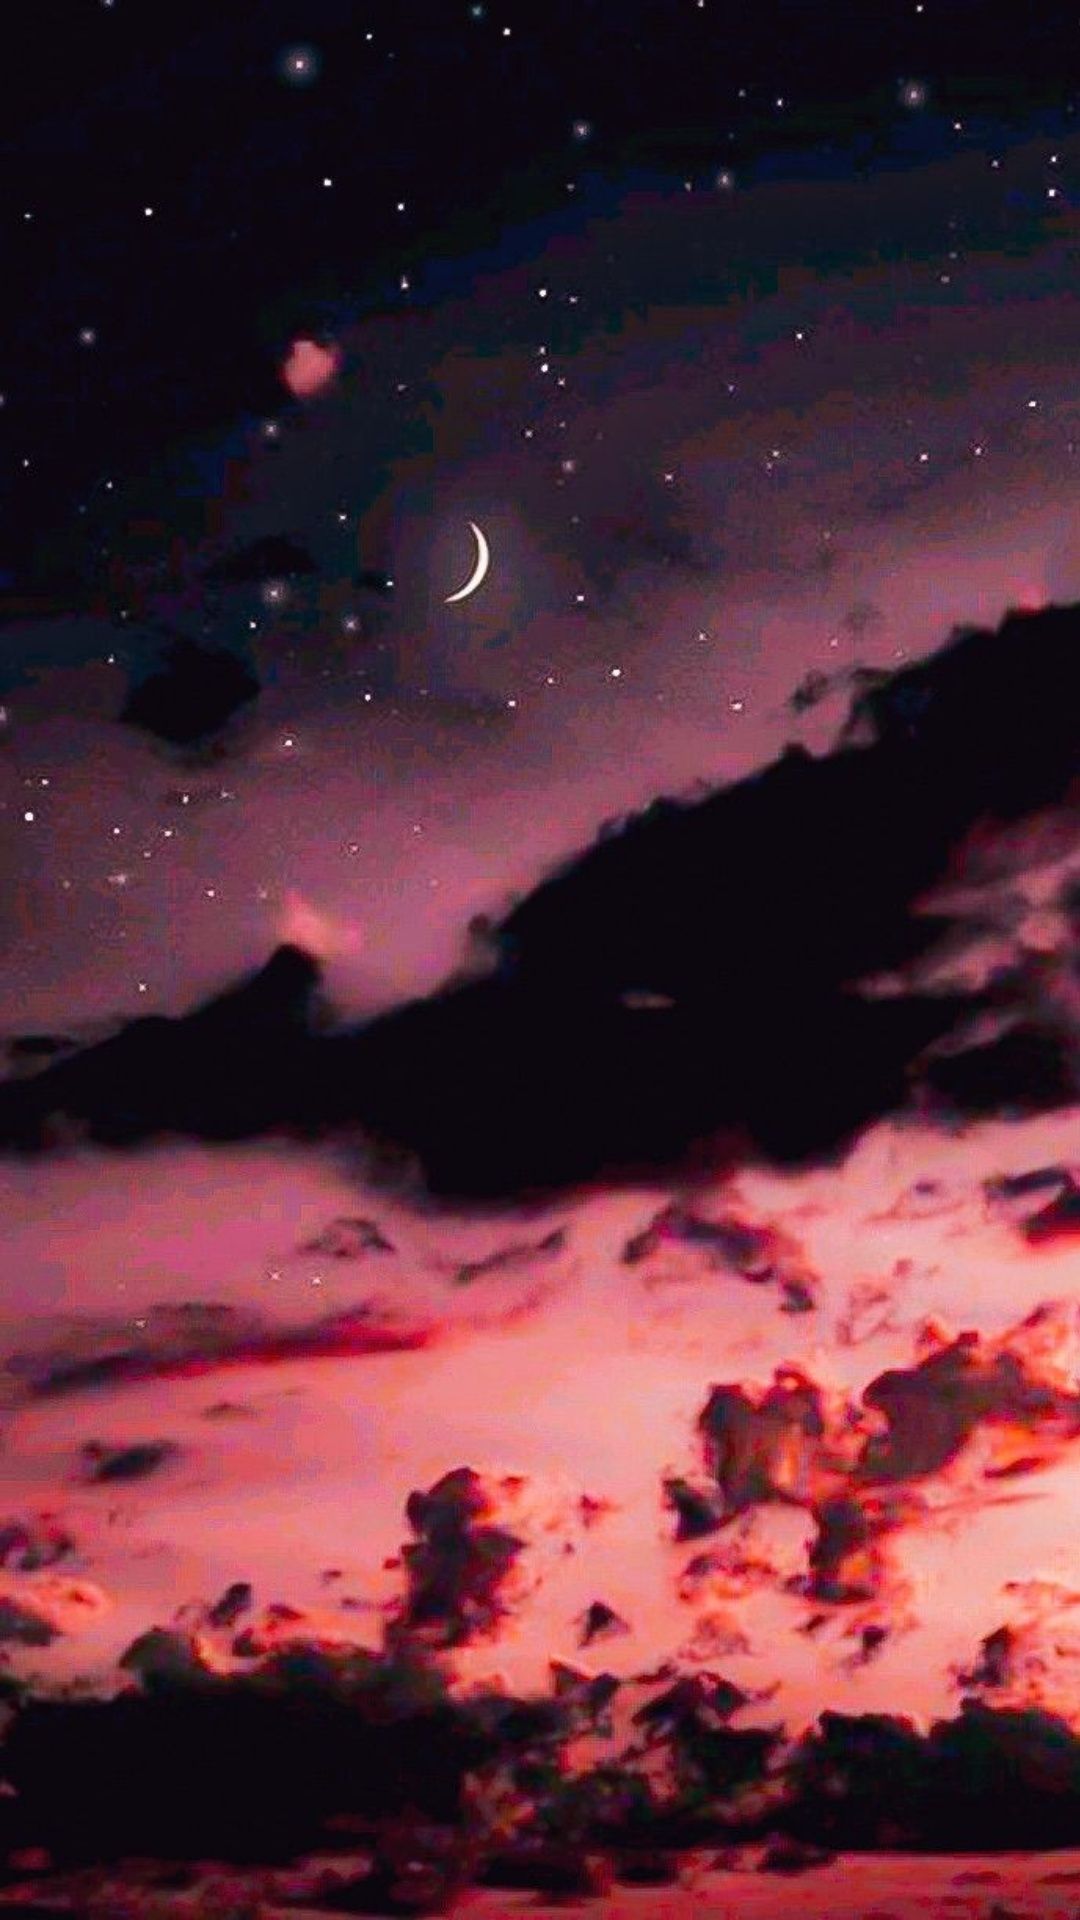 IPhone wallpaper of a pink sky with stars and a crescent moon - Cloud